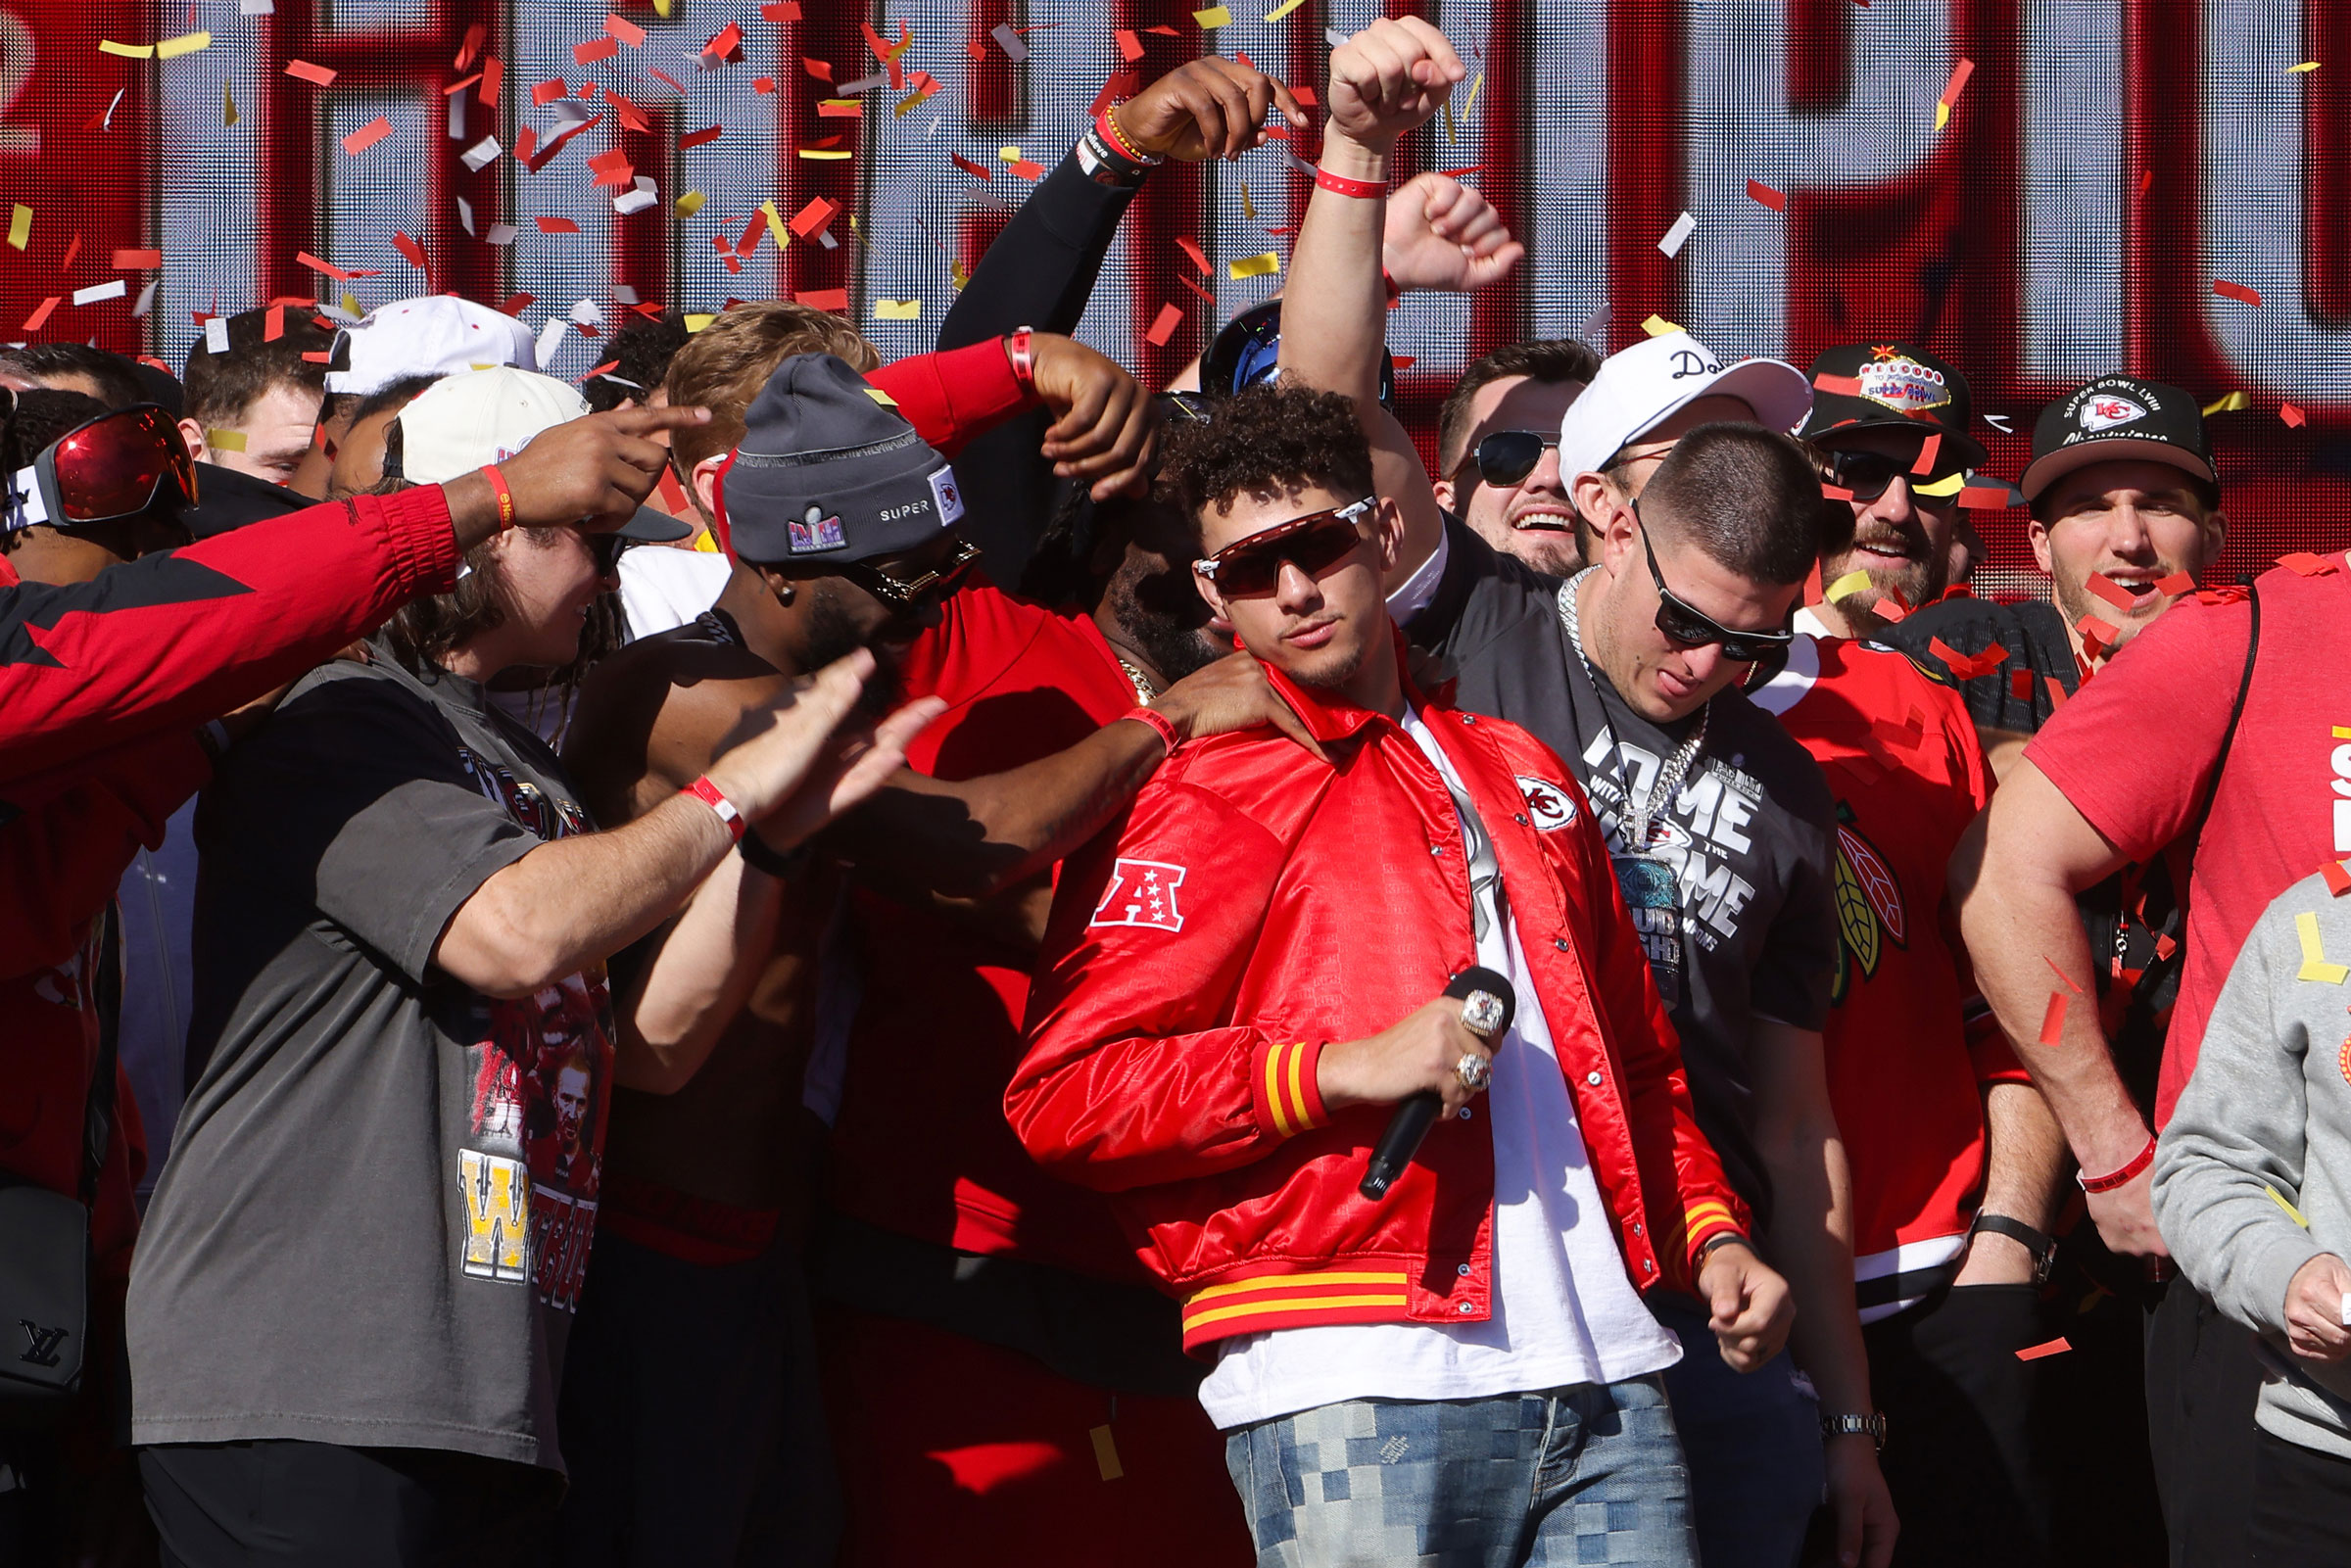 Patrick Mahomes celebrates with teammates on stage during the Super Bowl victory parade.